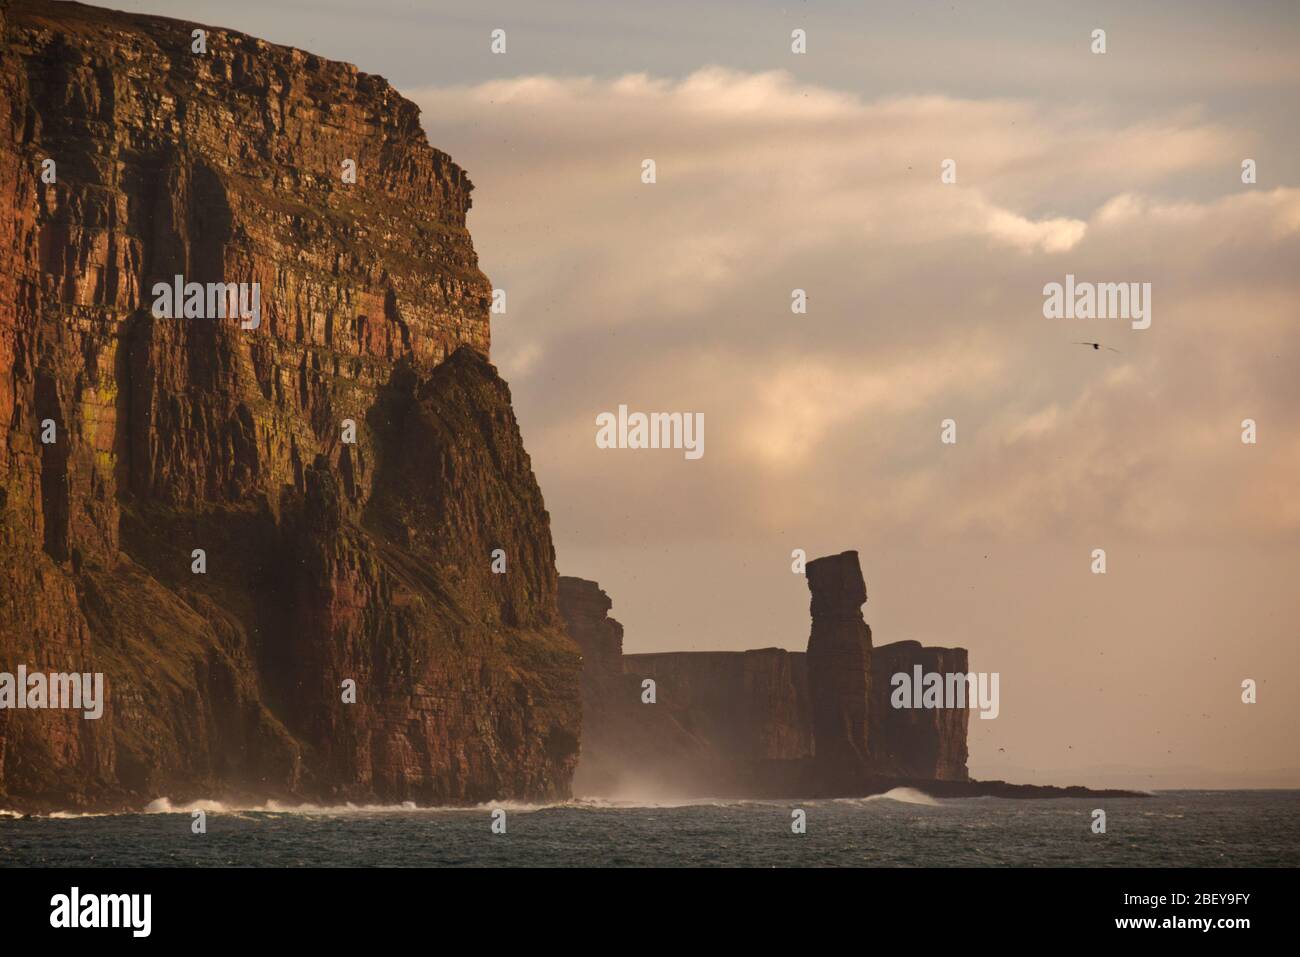 St John's Head cliffs and Old Man of Hoy, Orkney Isles Stock Photo